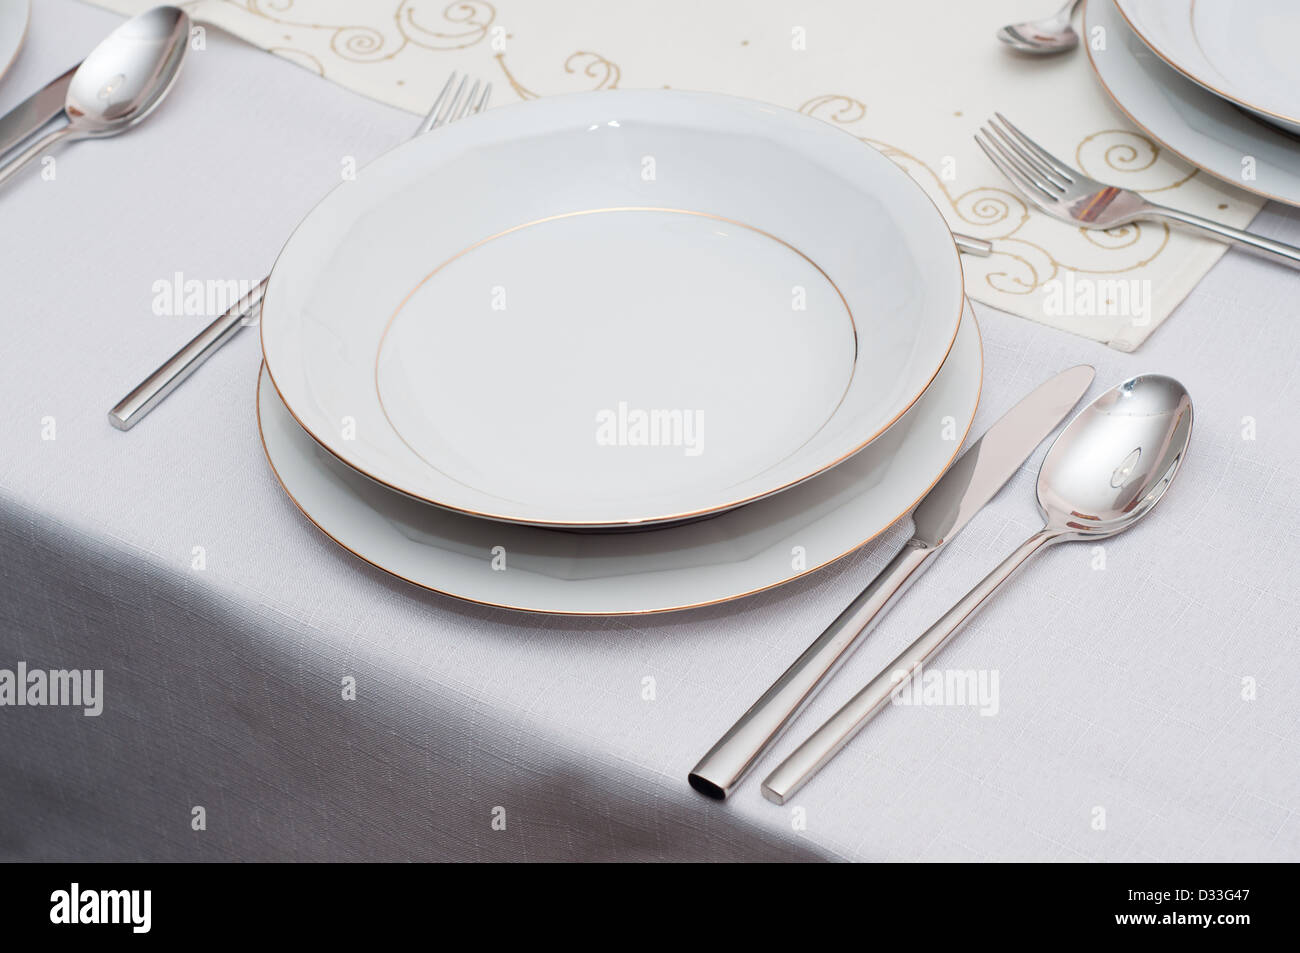 table with white porcelain plate. Stock Photo